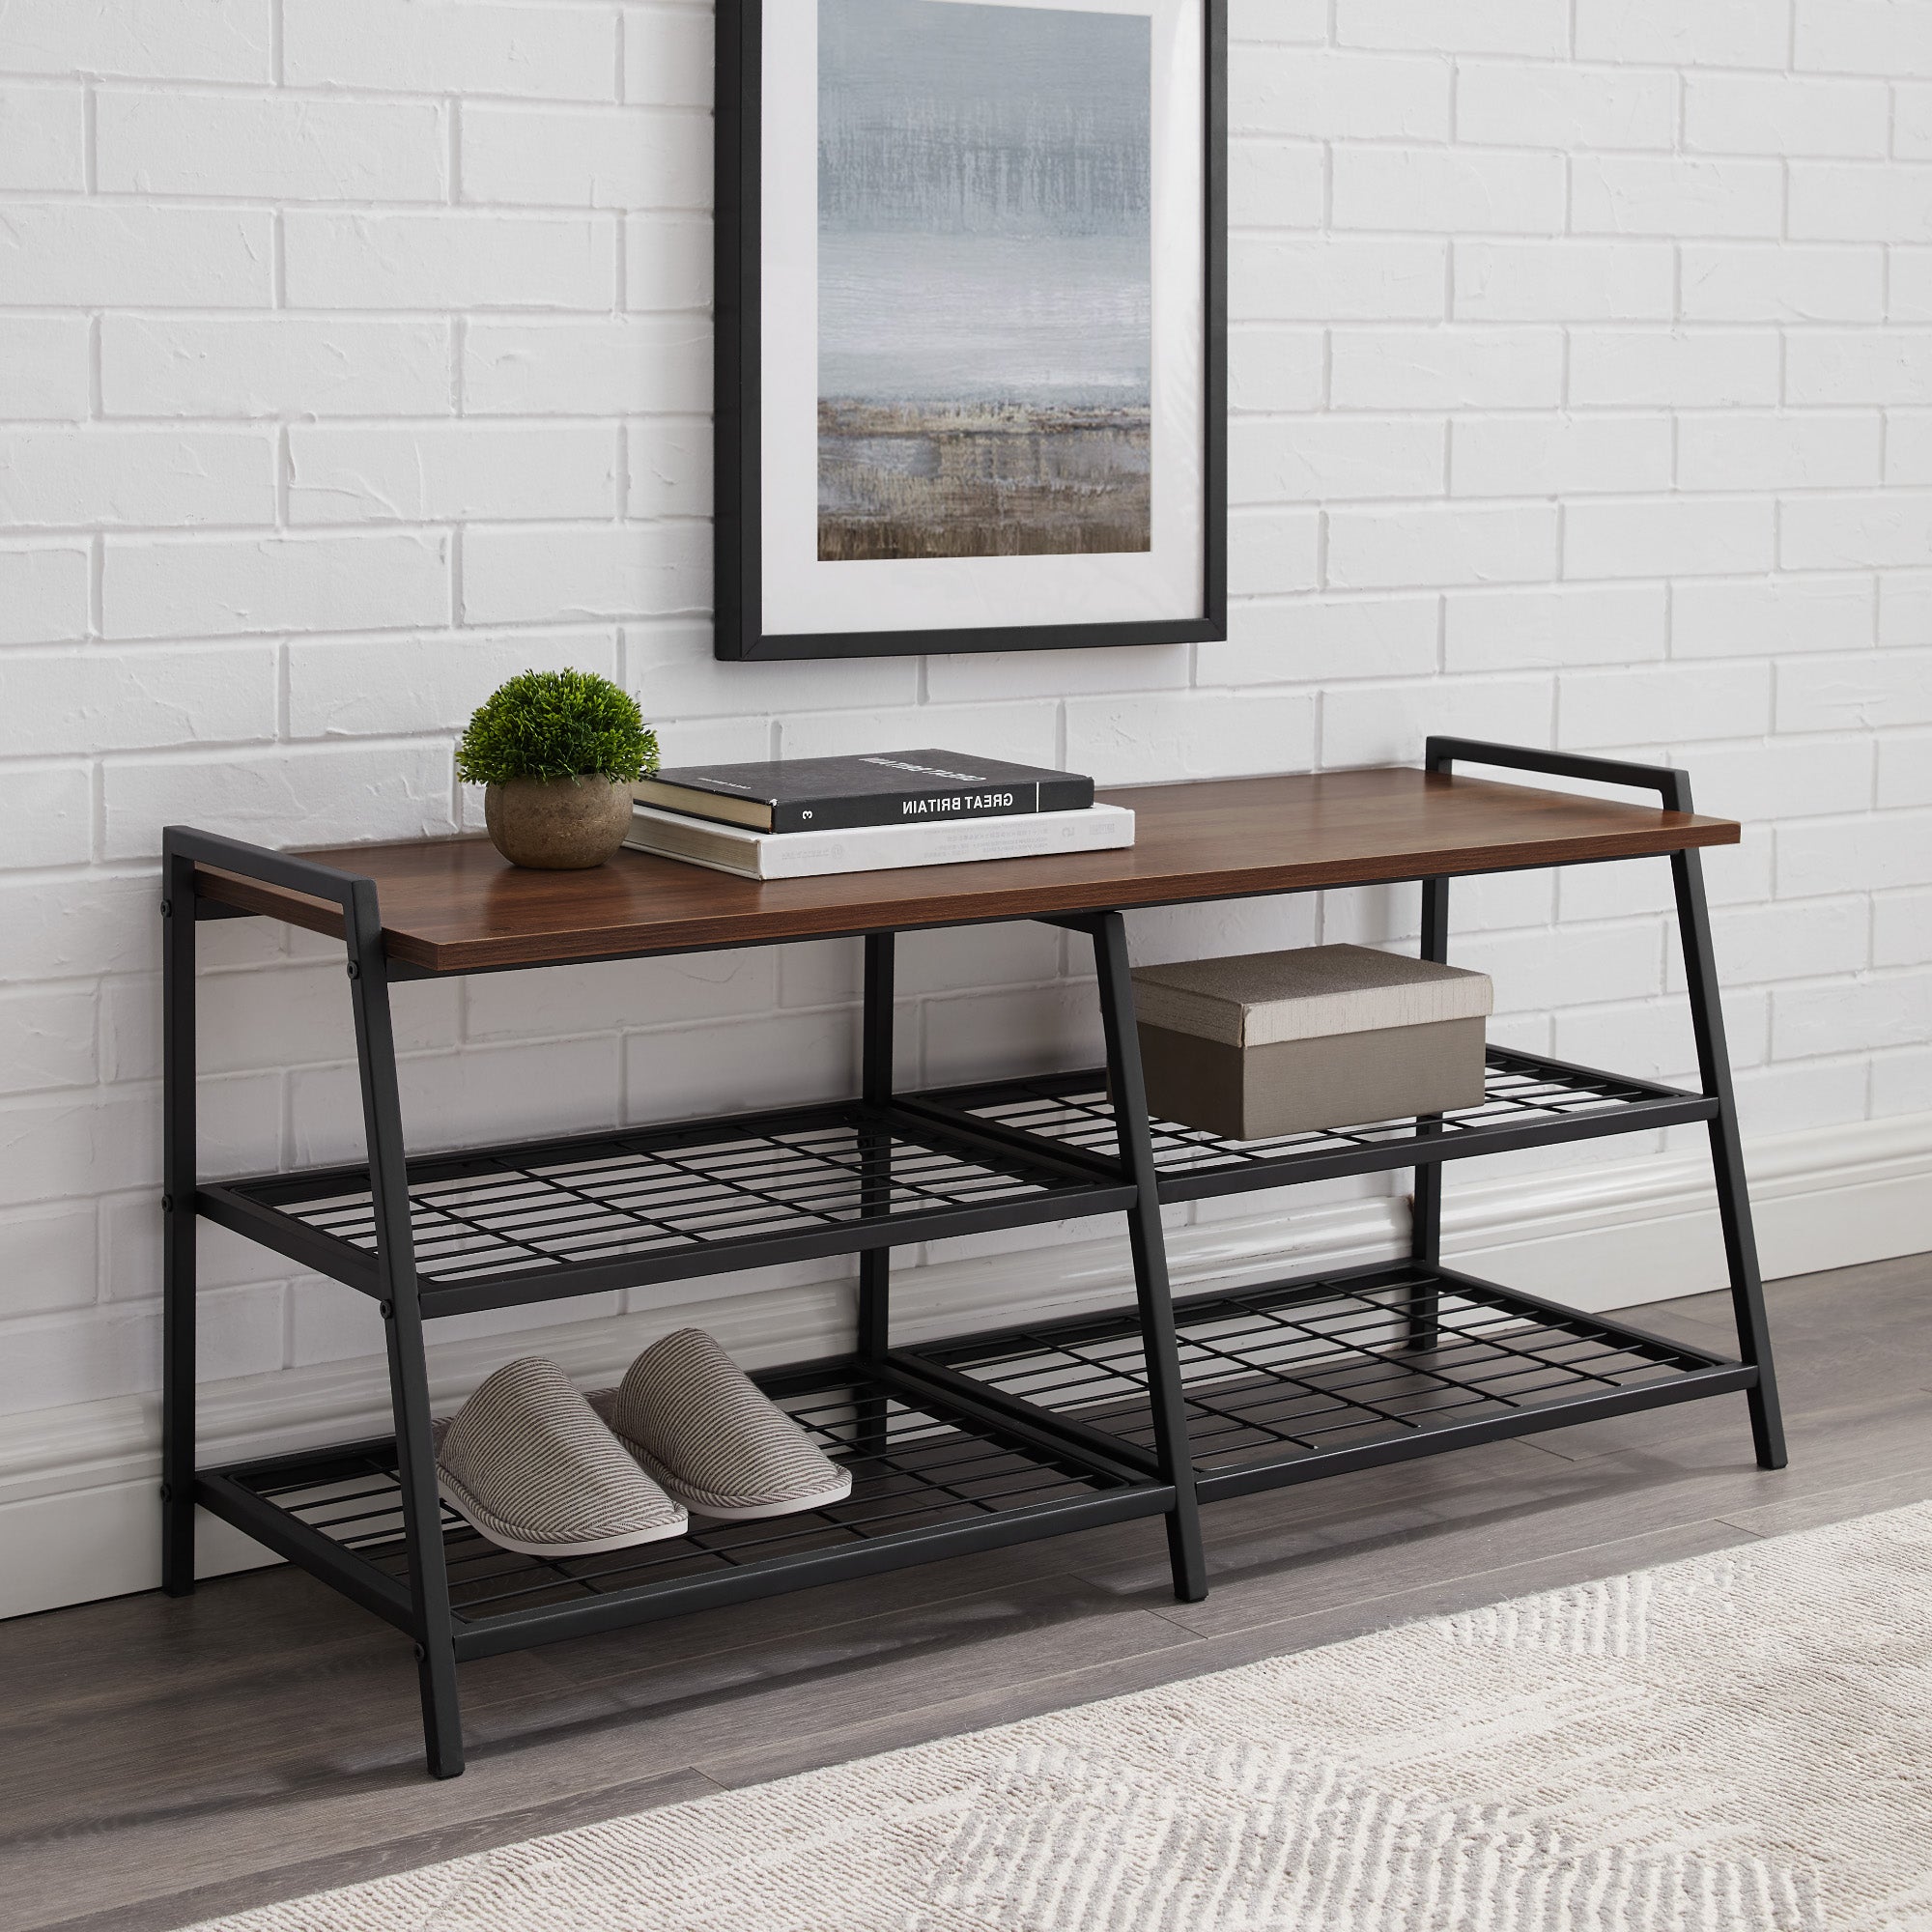 Arlo 42" Industrial Metal and Wood Entry Bench with Shoe Rack - East Shore Modern Home Furnishings